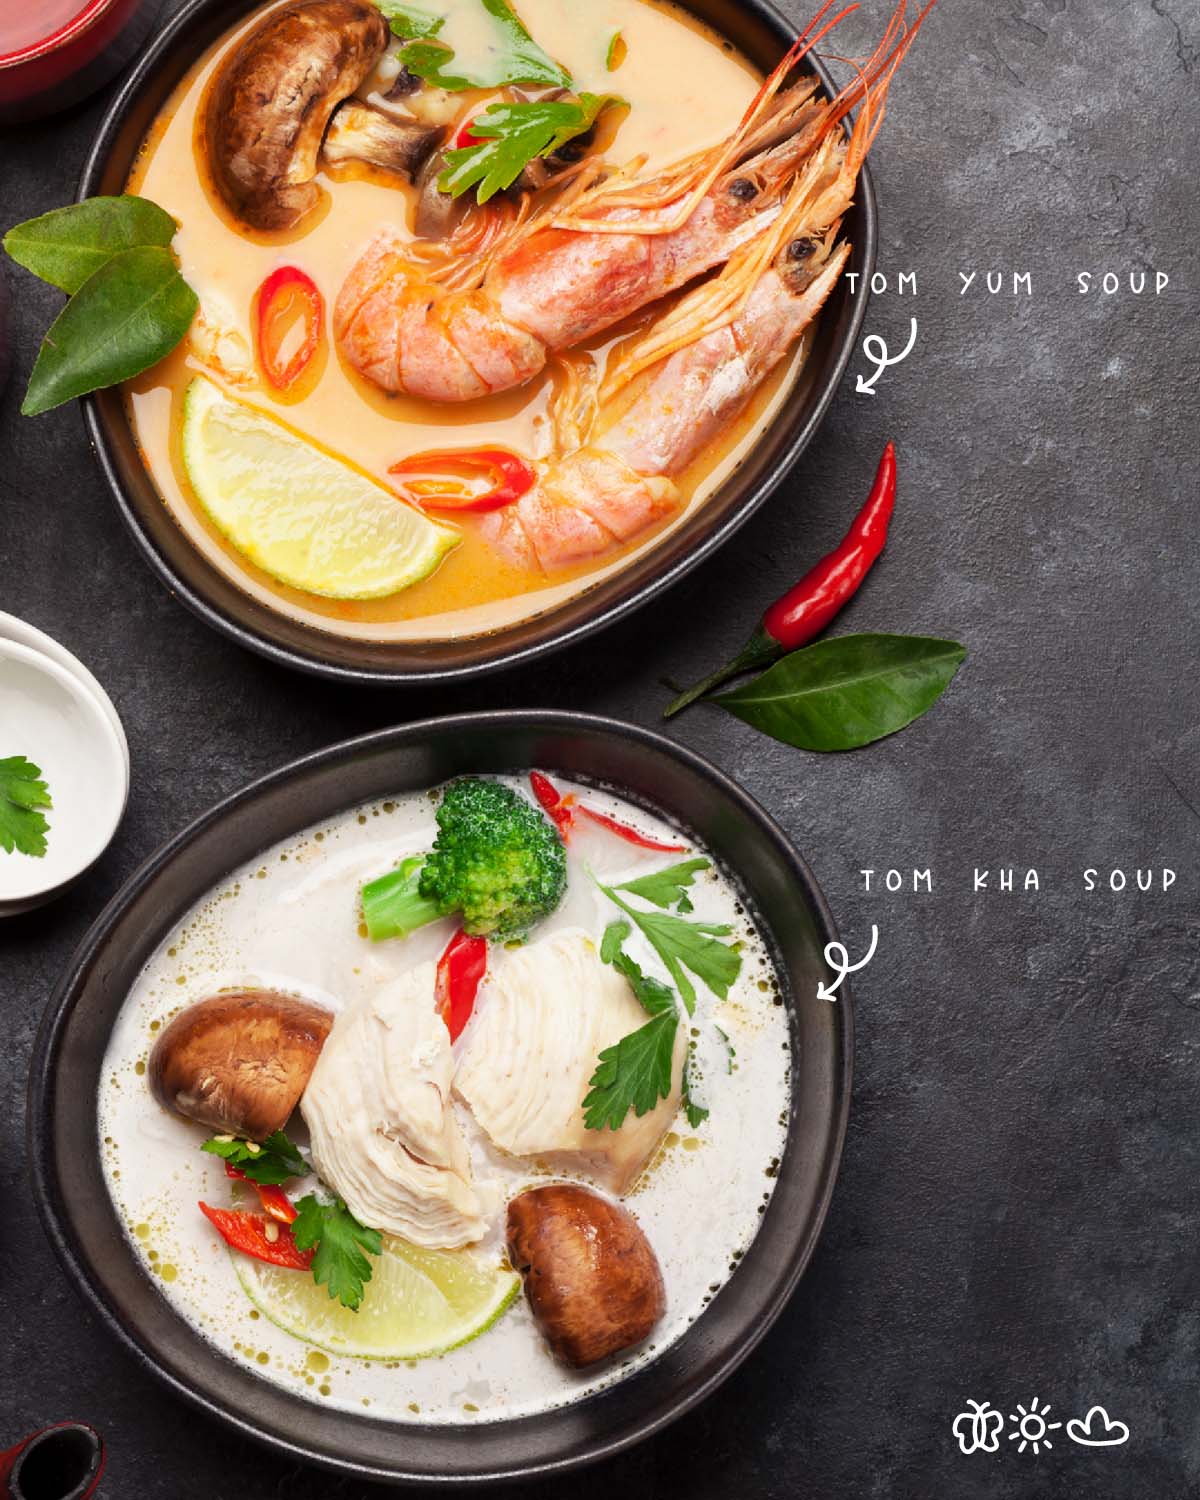 Tom yum and tom kha are two of the most popular. But which one is better? In this blog post, we'll take a look at the difference between these two soups and help you decide which is your favorite.